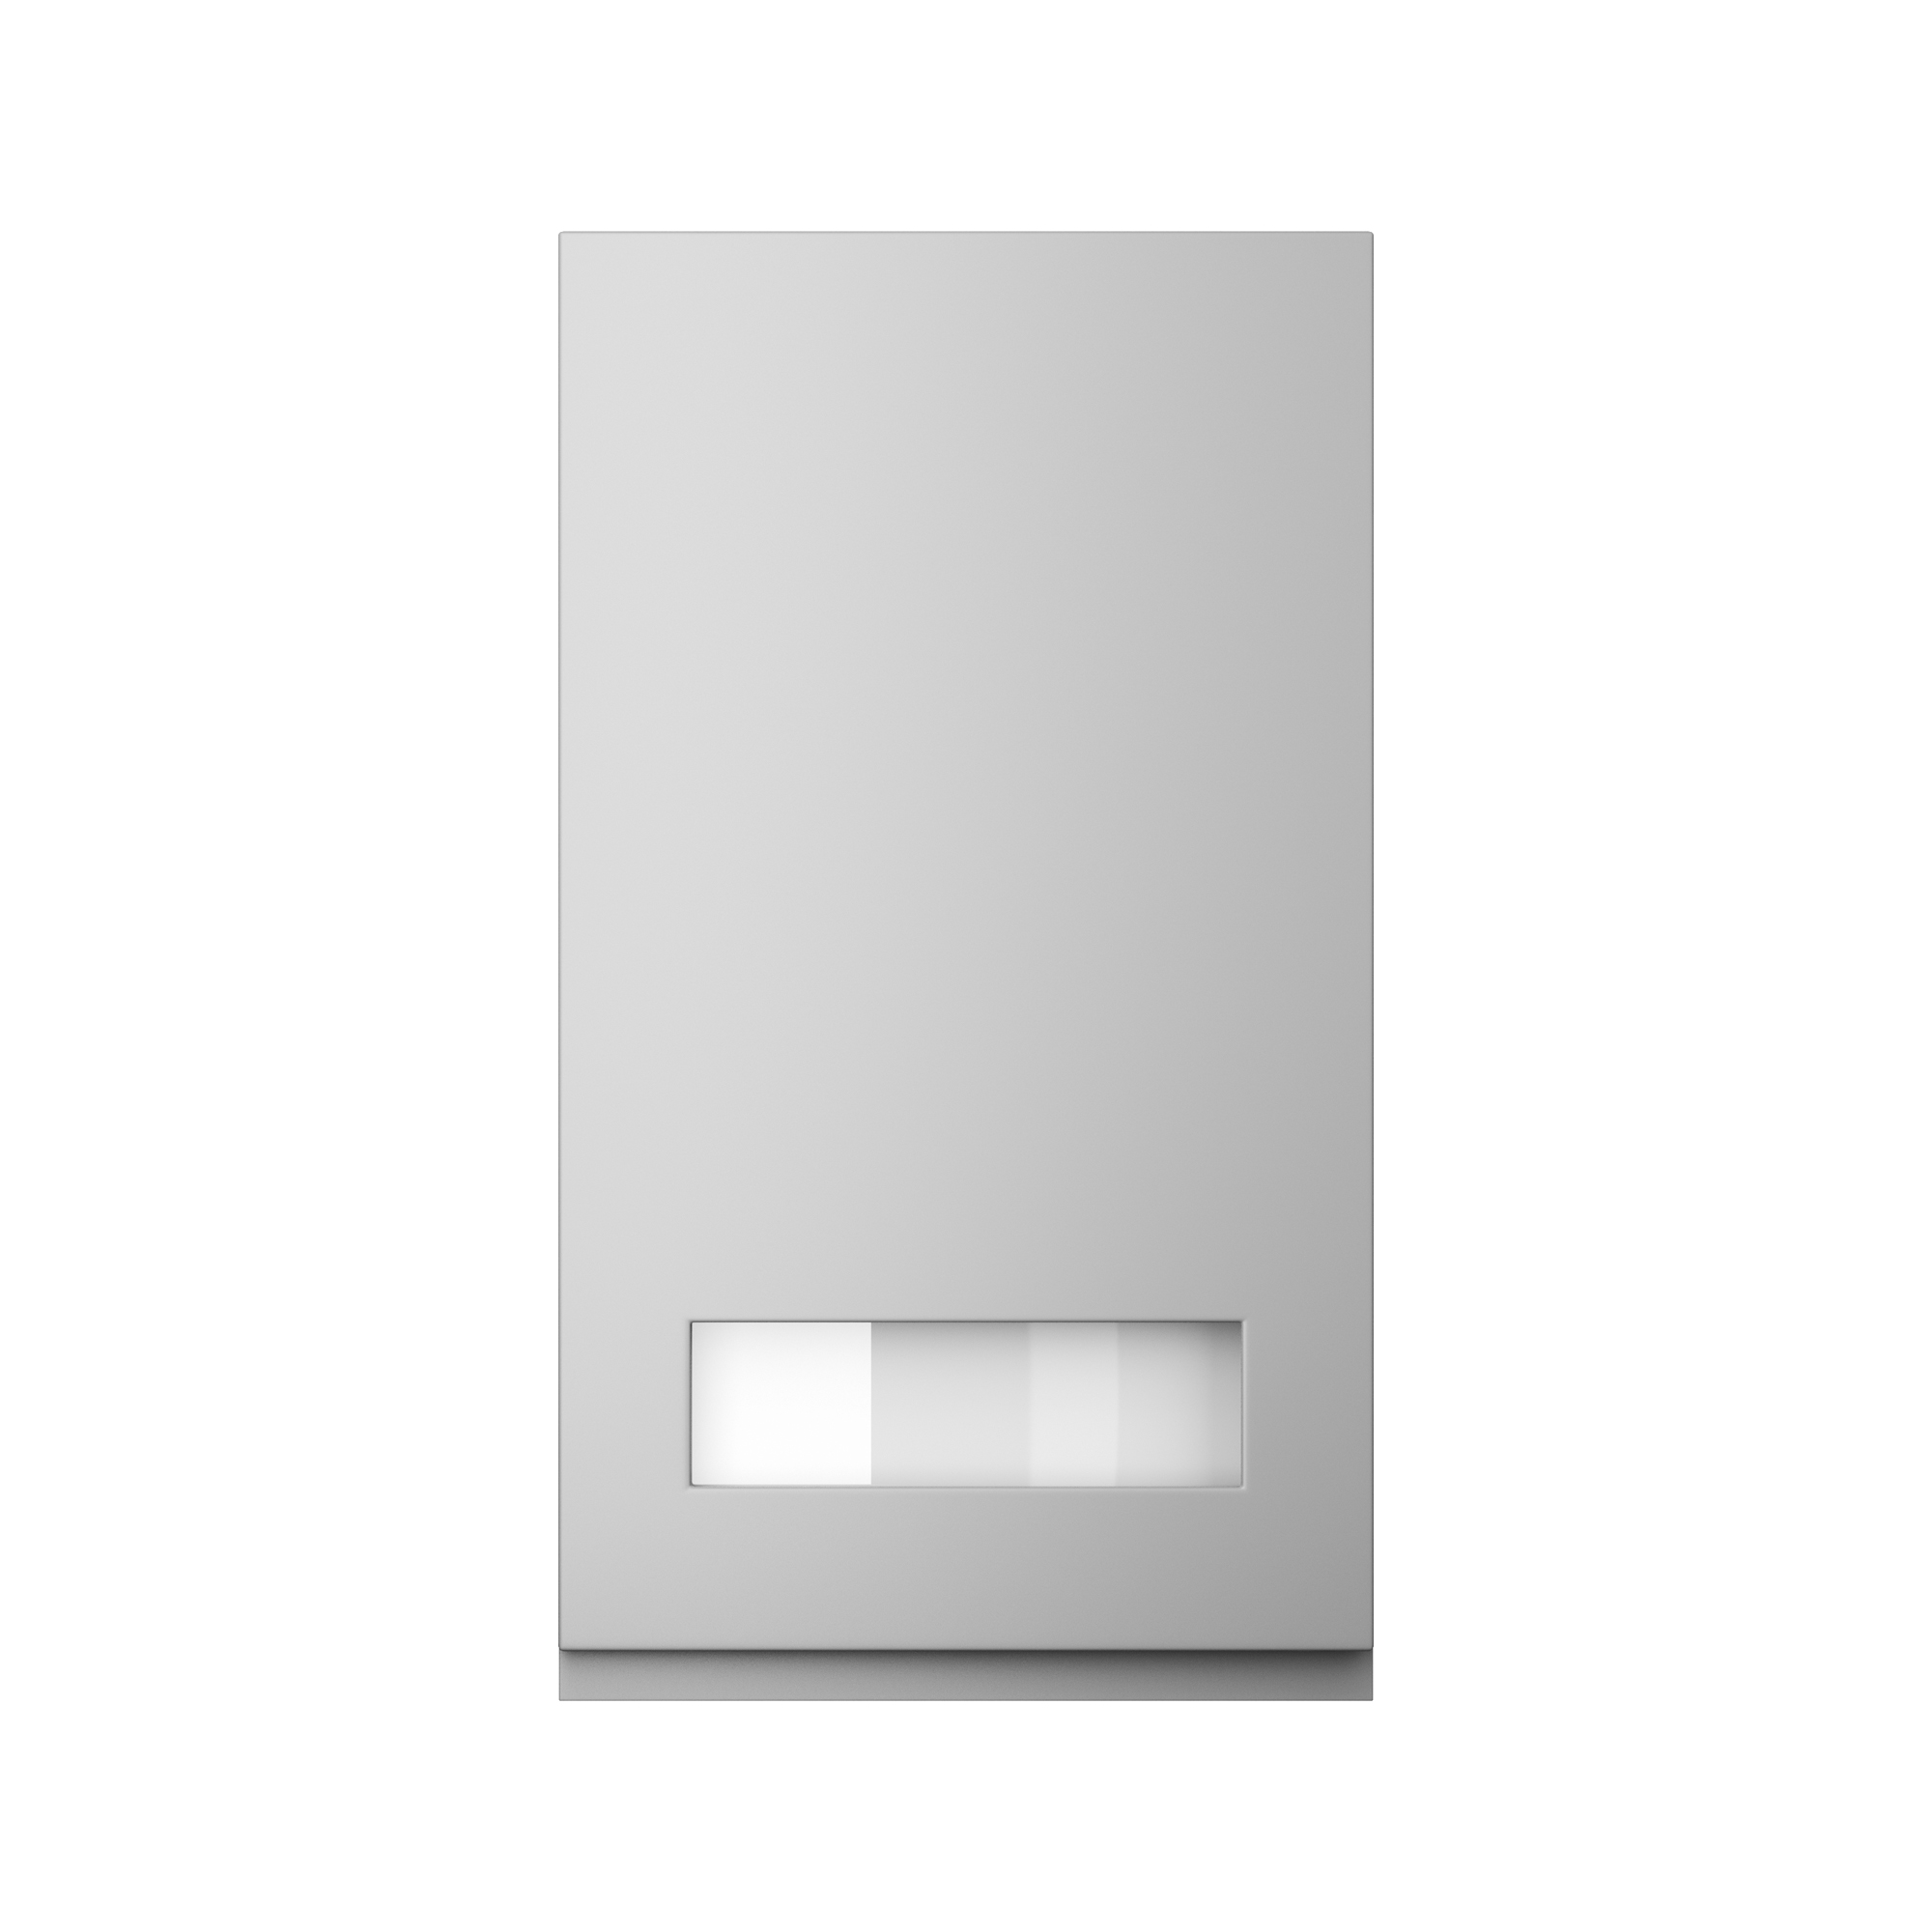 715 X 497 Letterbox Frame Includes Clear Glass - Strada White Gloss